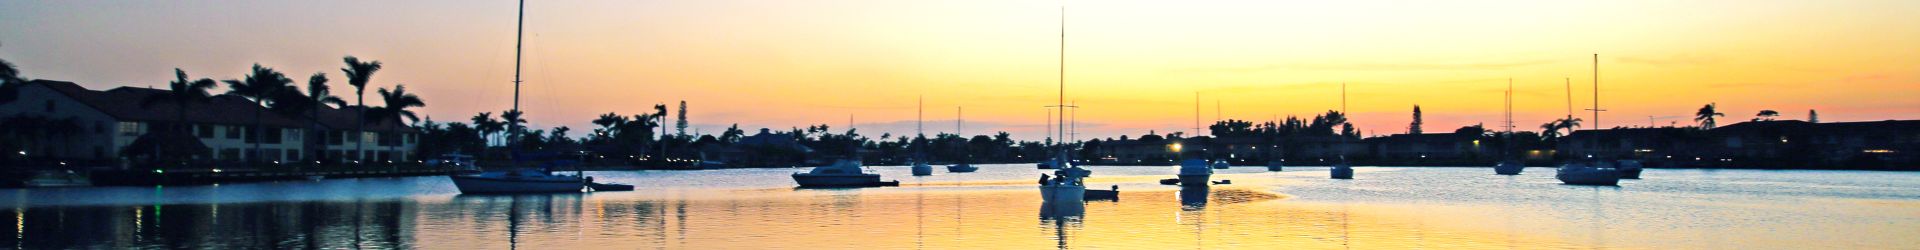 sun-island-cape-coral-charter-boats-and-services-blog-page-cover-image-gray